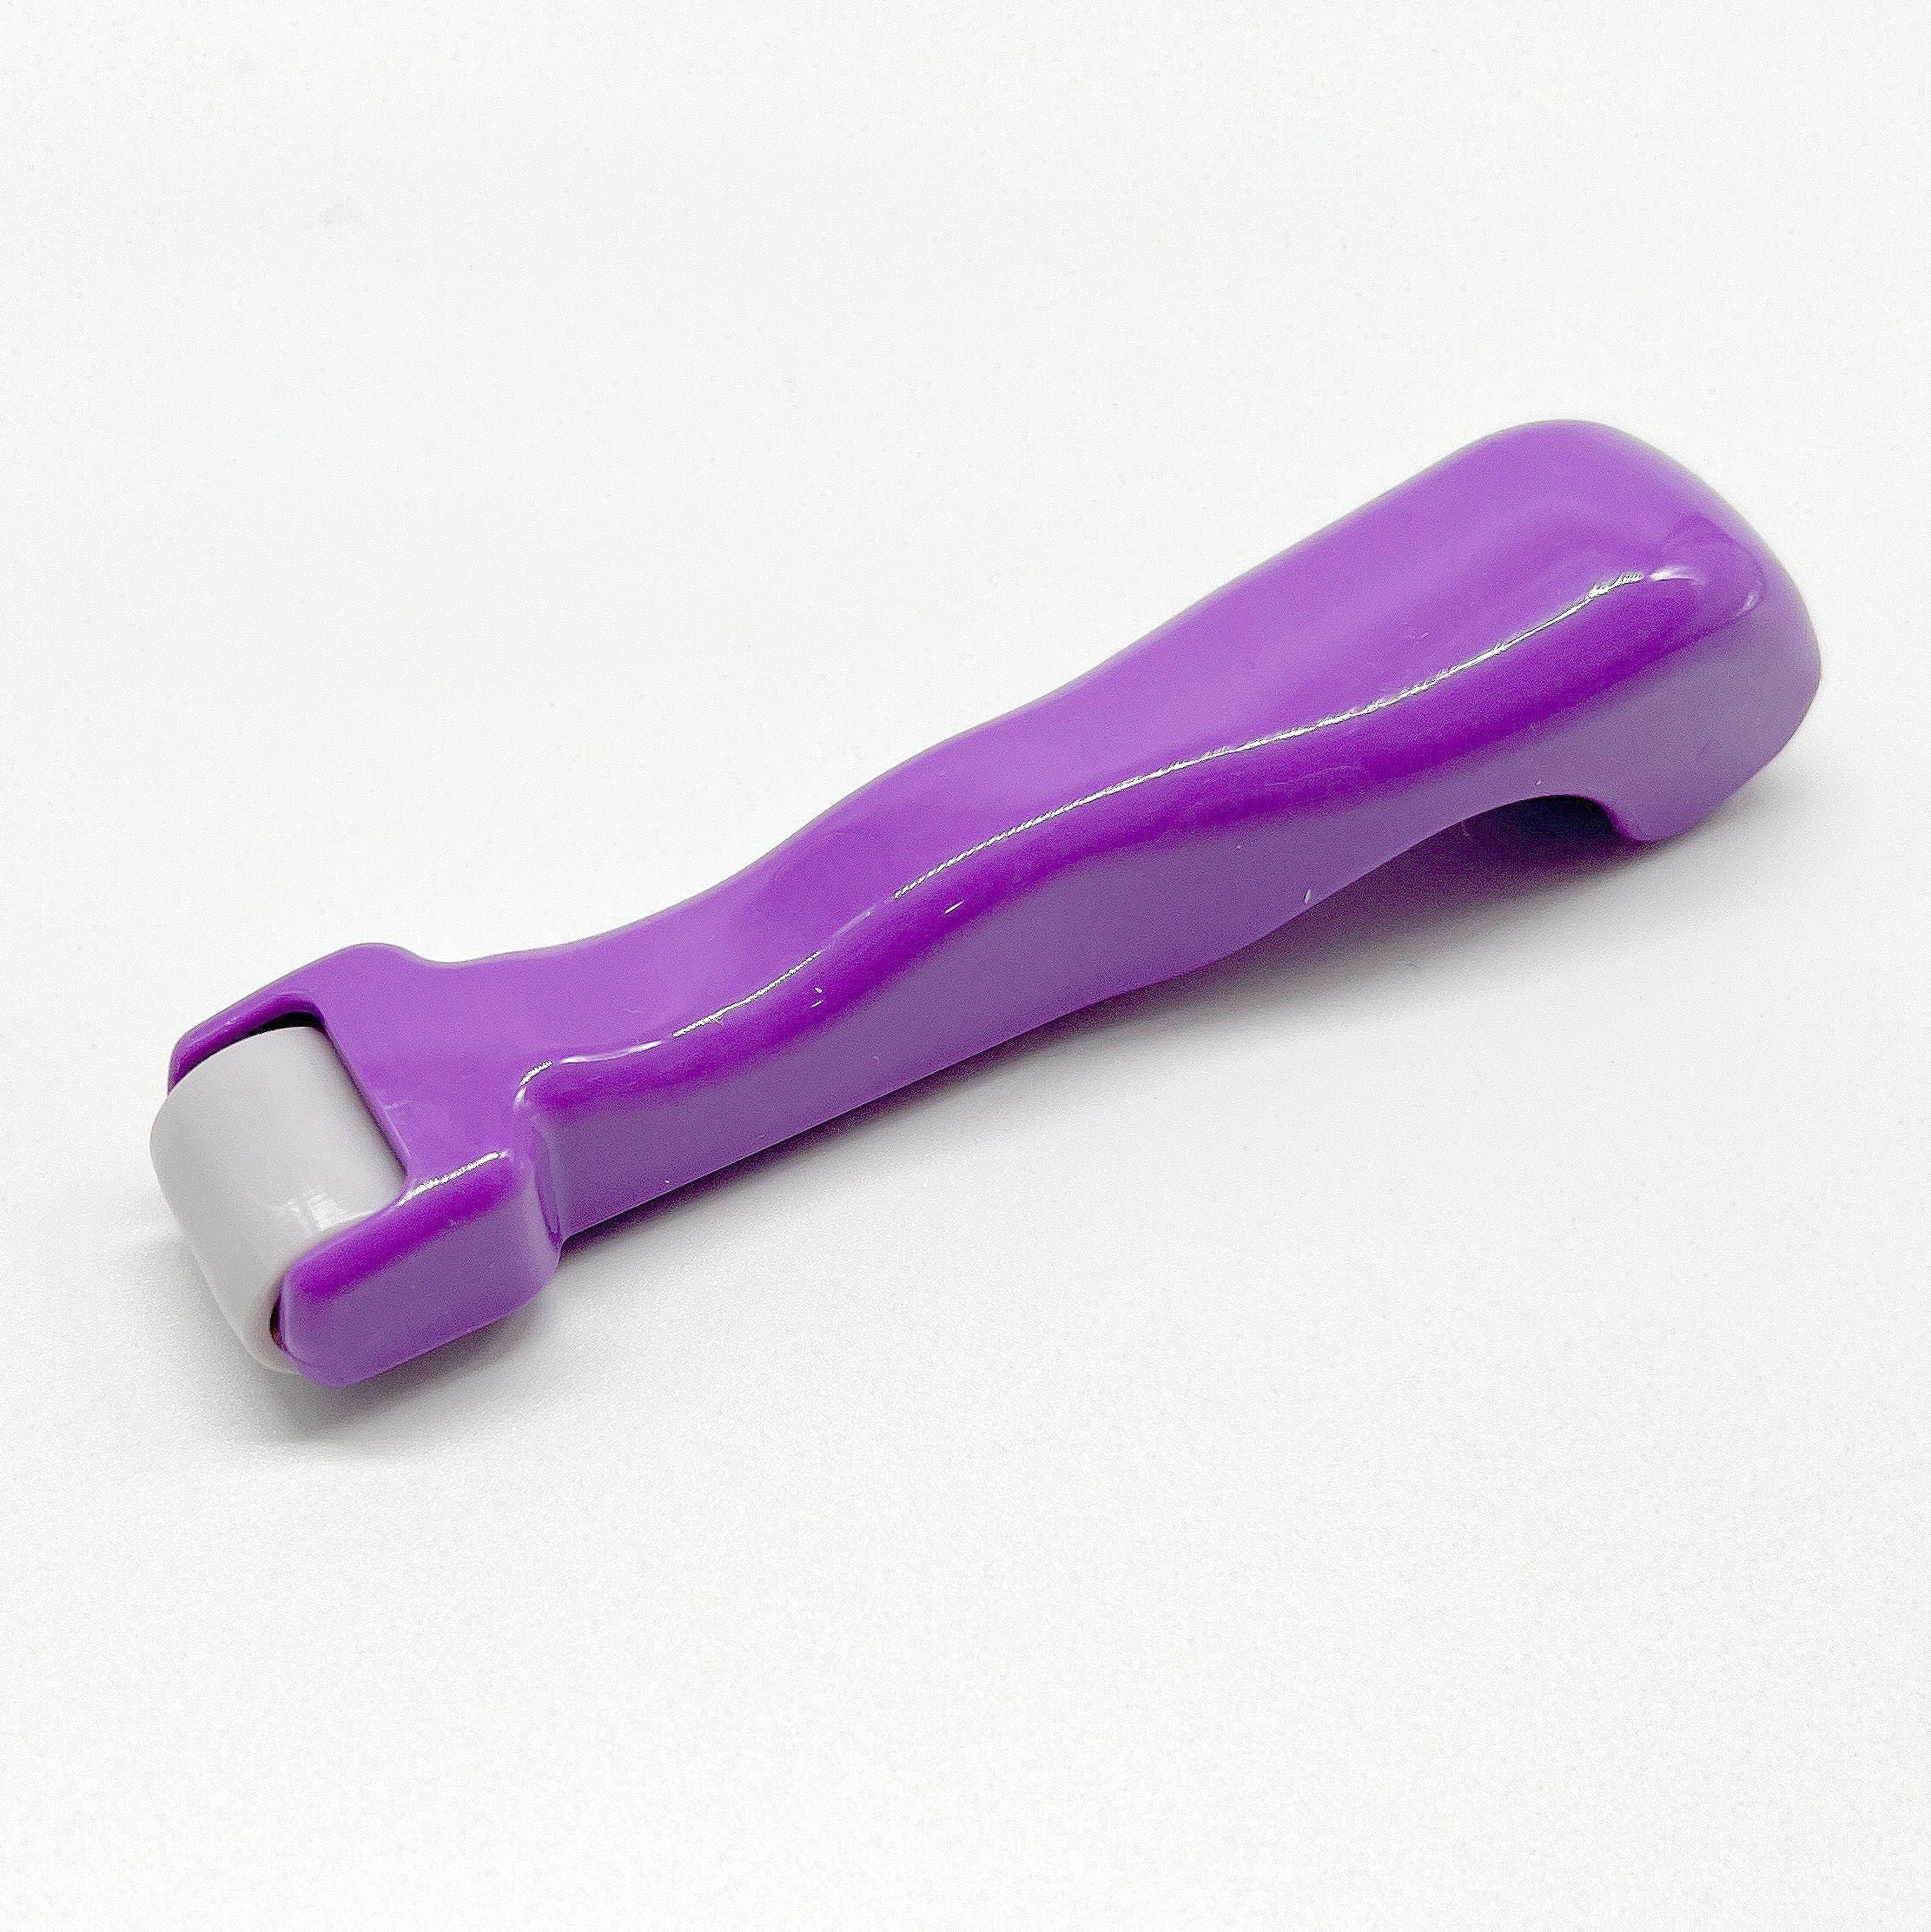 Sewing and Quilting Fabric Seam Pressing Roller Tool in 2 Colors